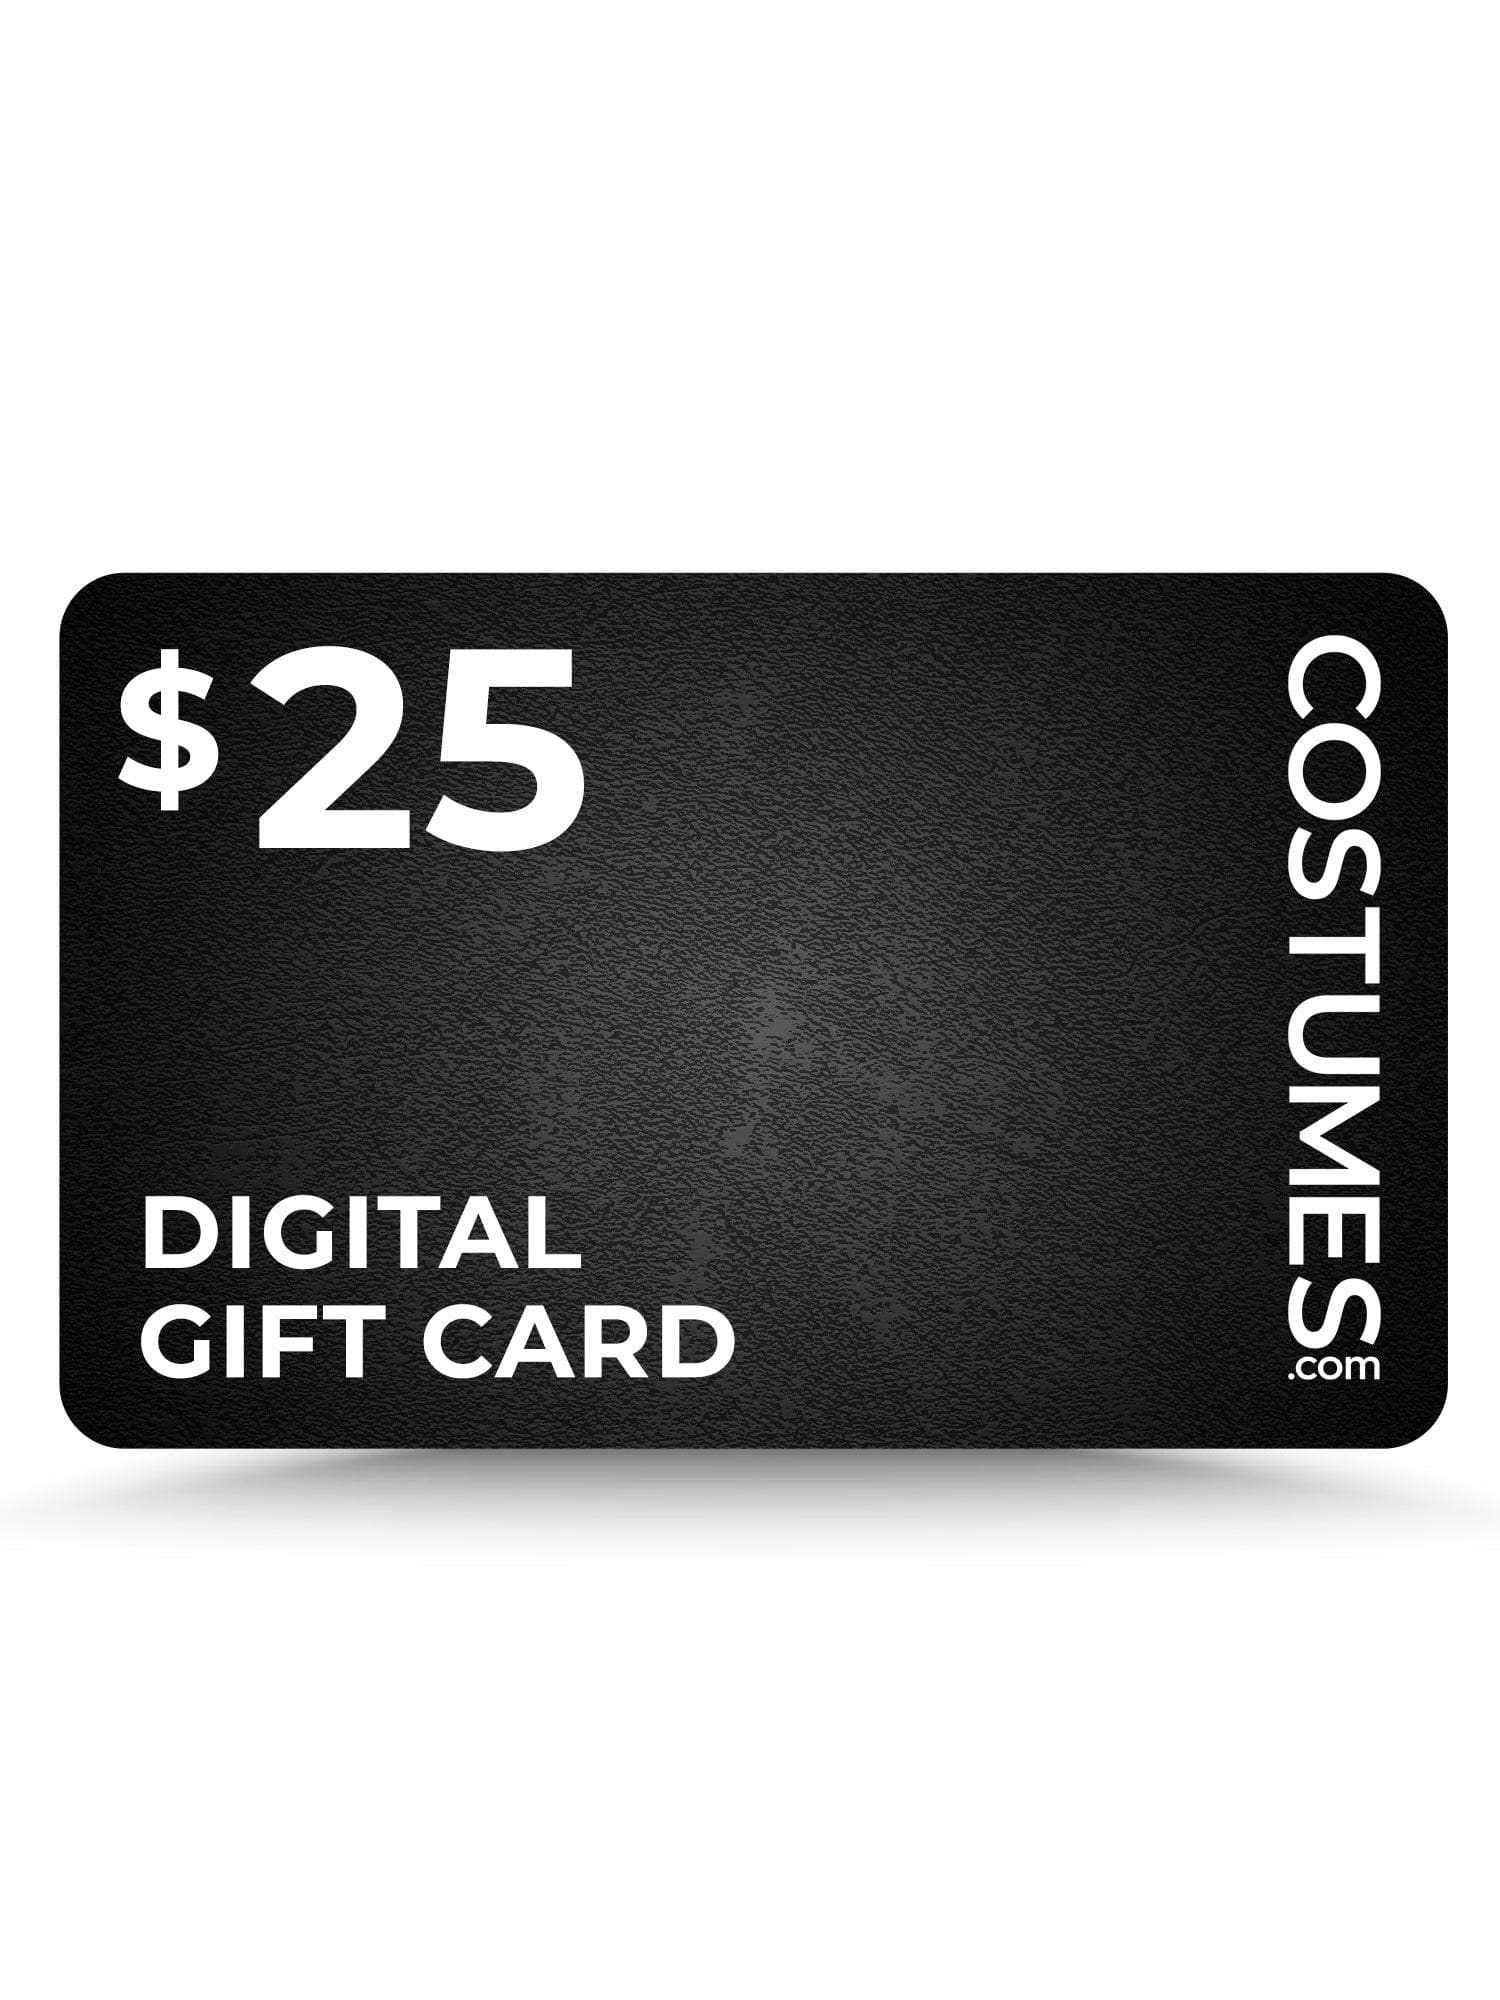 Costumes.com Gift Card